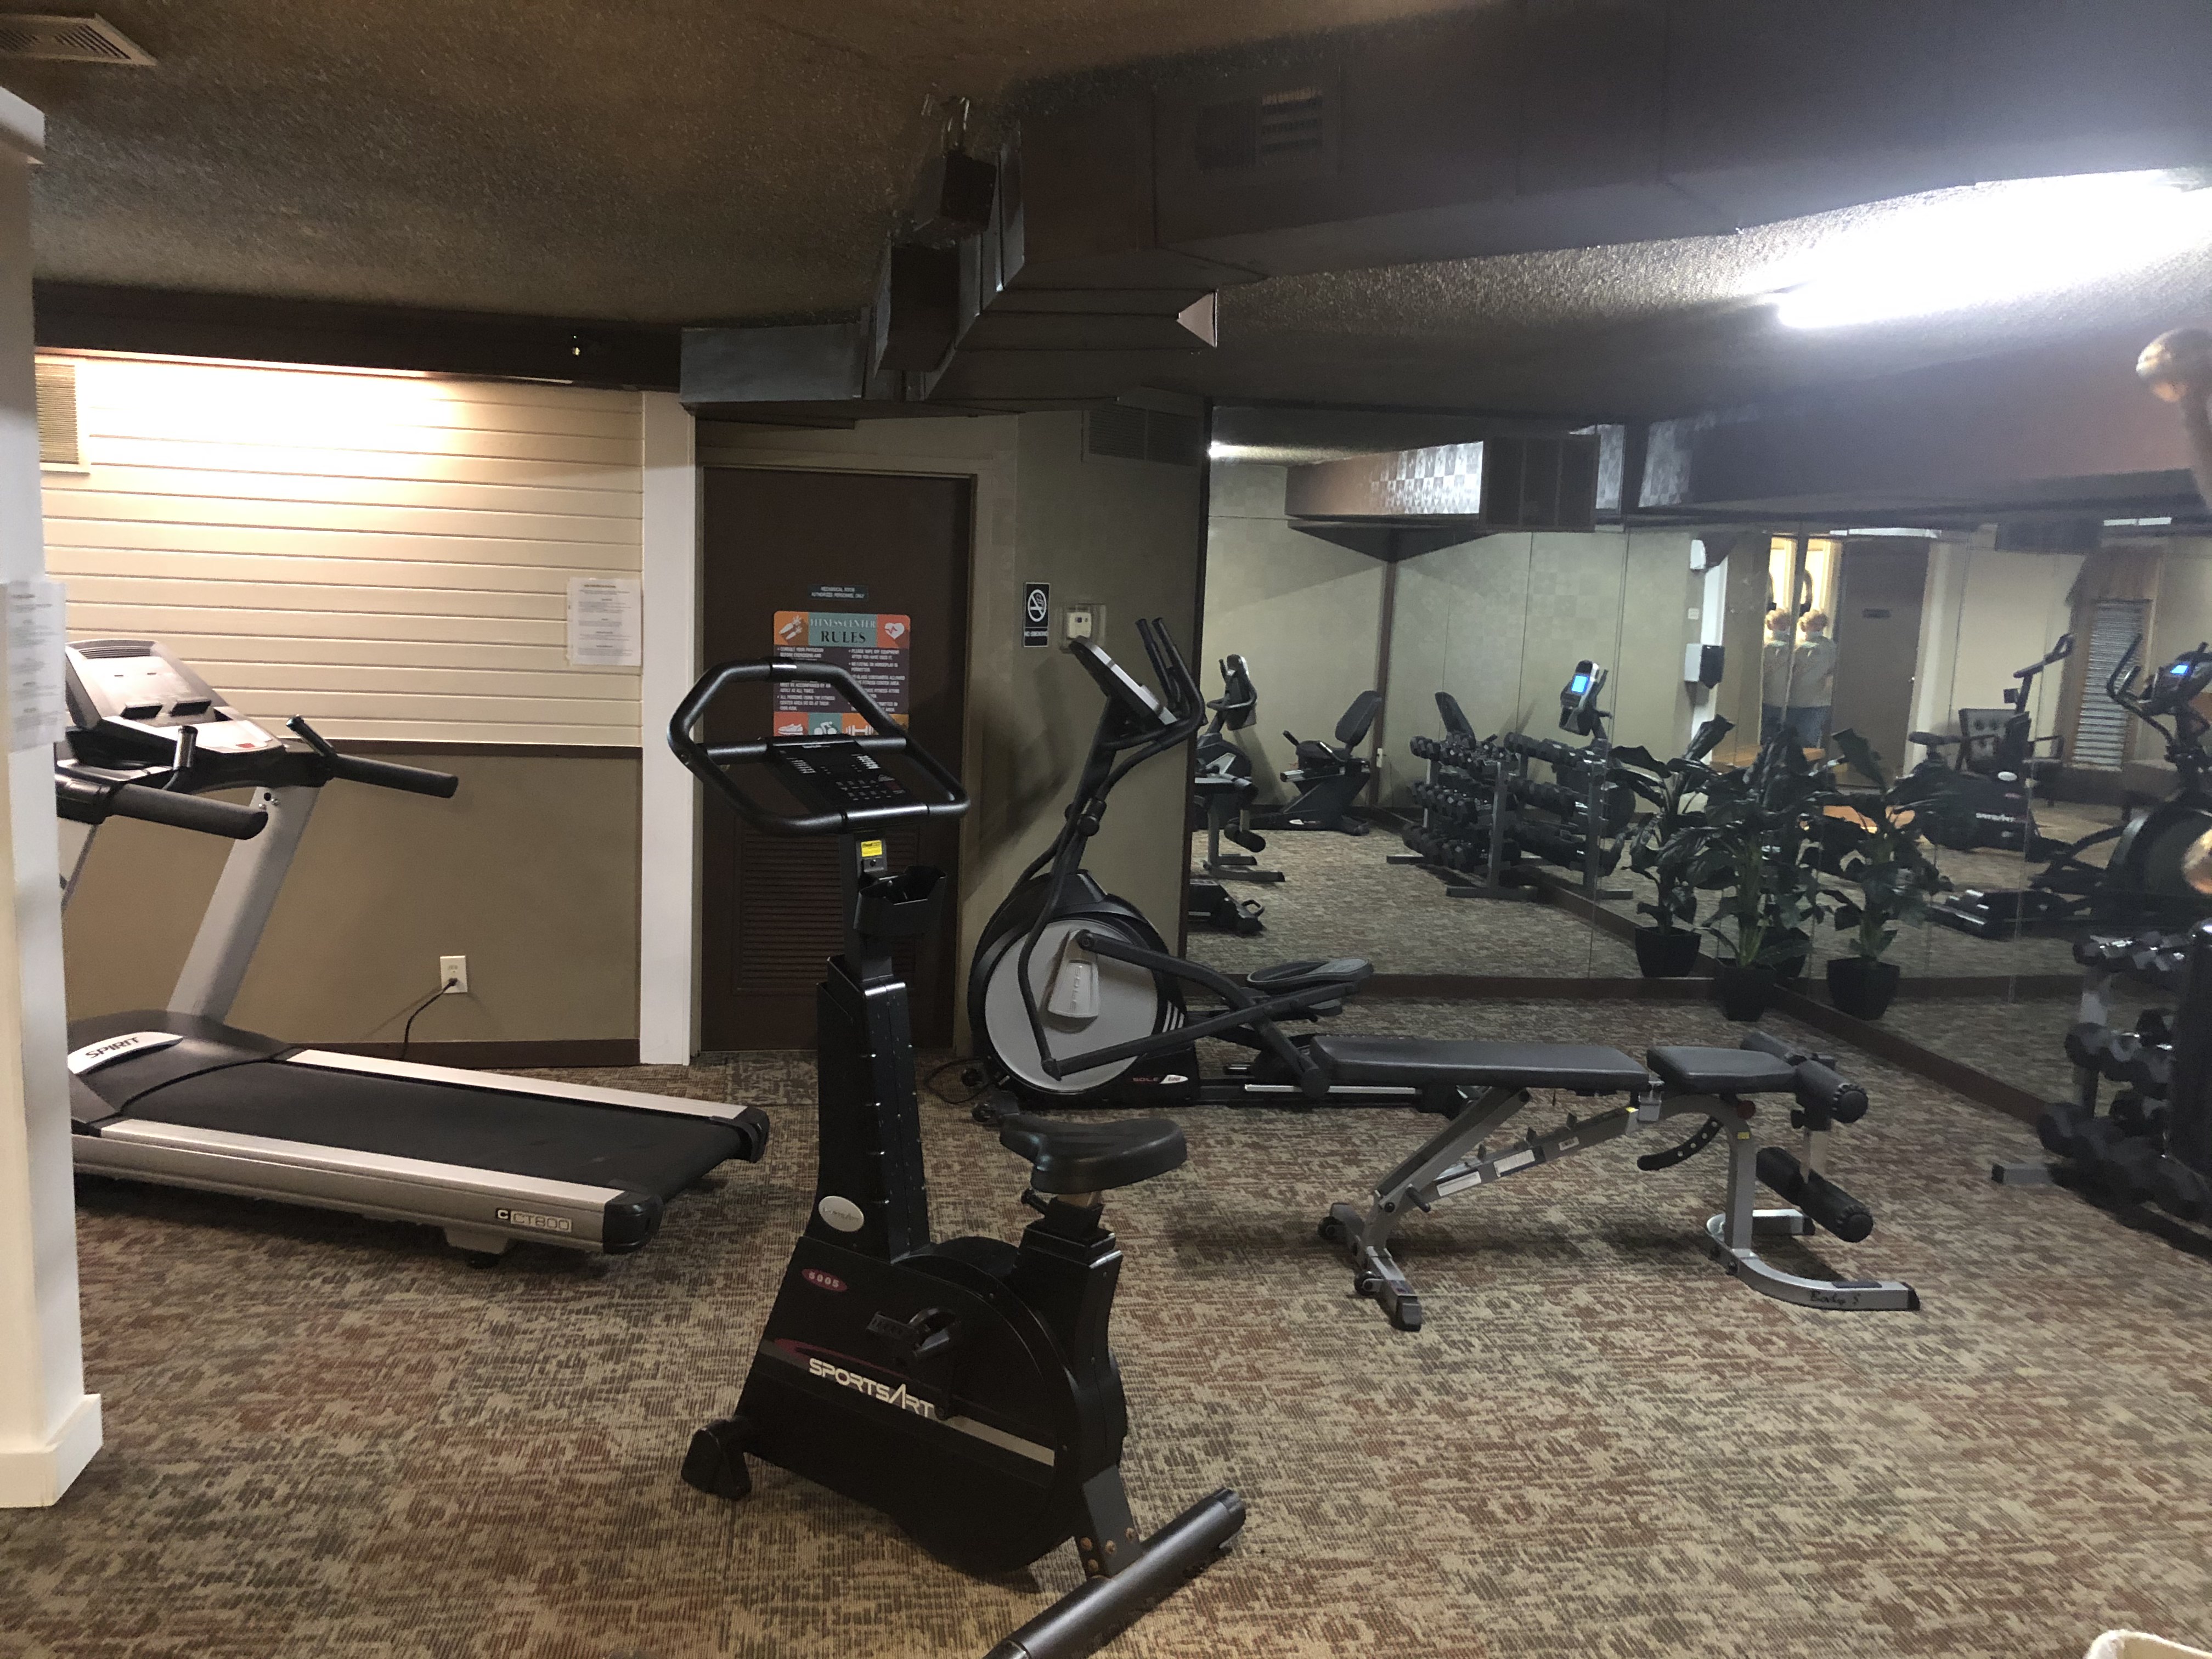 Fitness center at Fairway Tower and Manor Apartments, 750 Mull Avenue, Akron, OH 44313